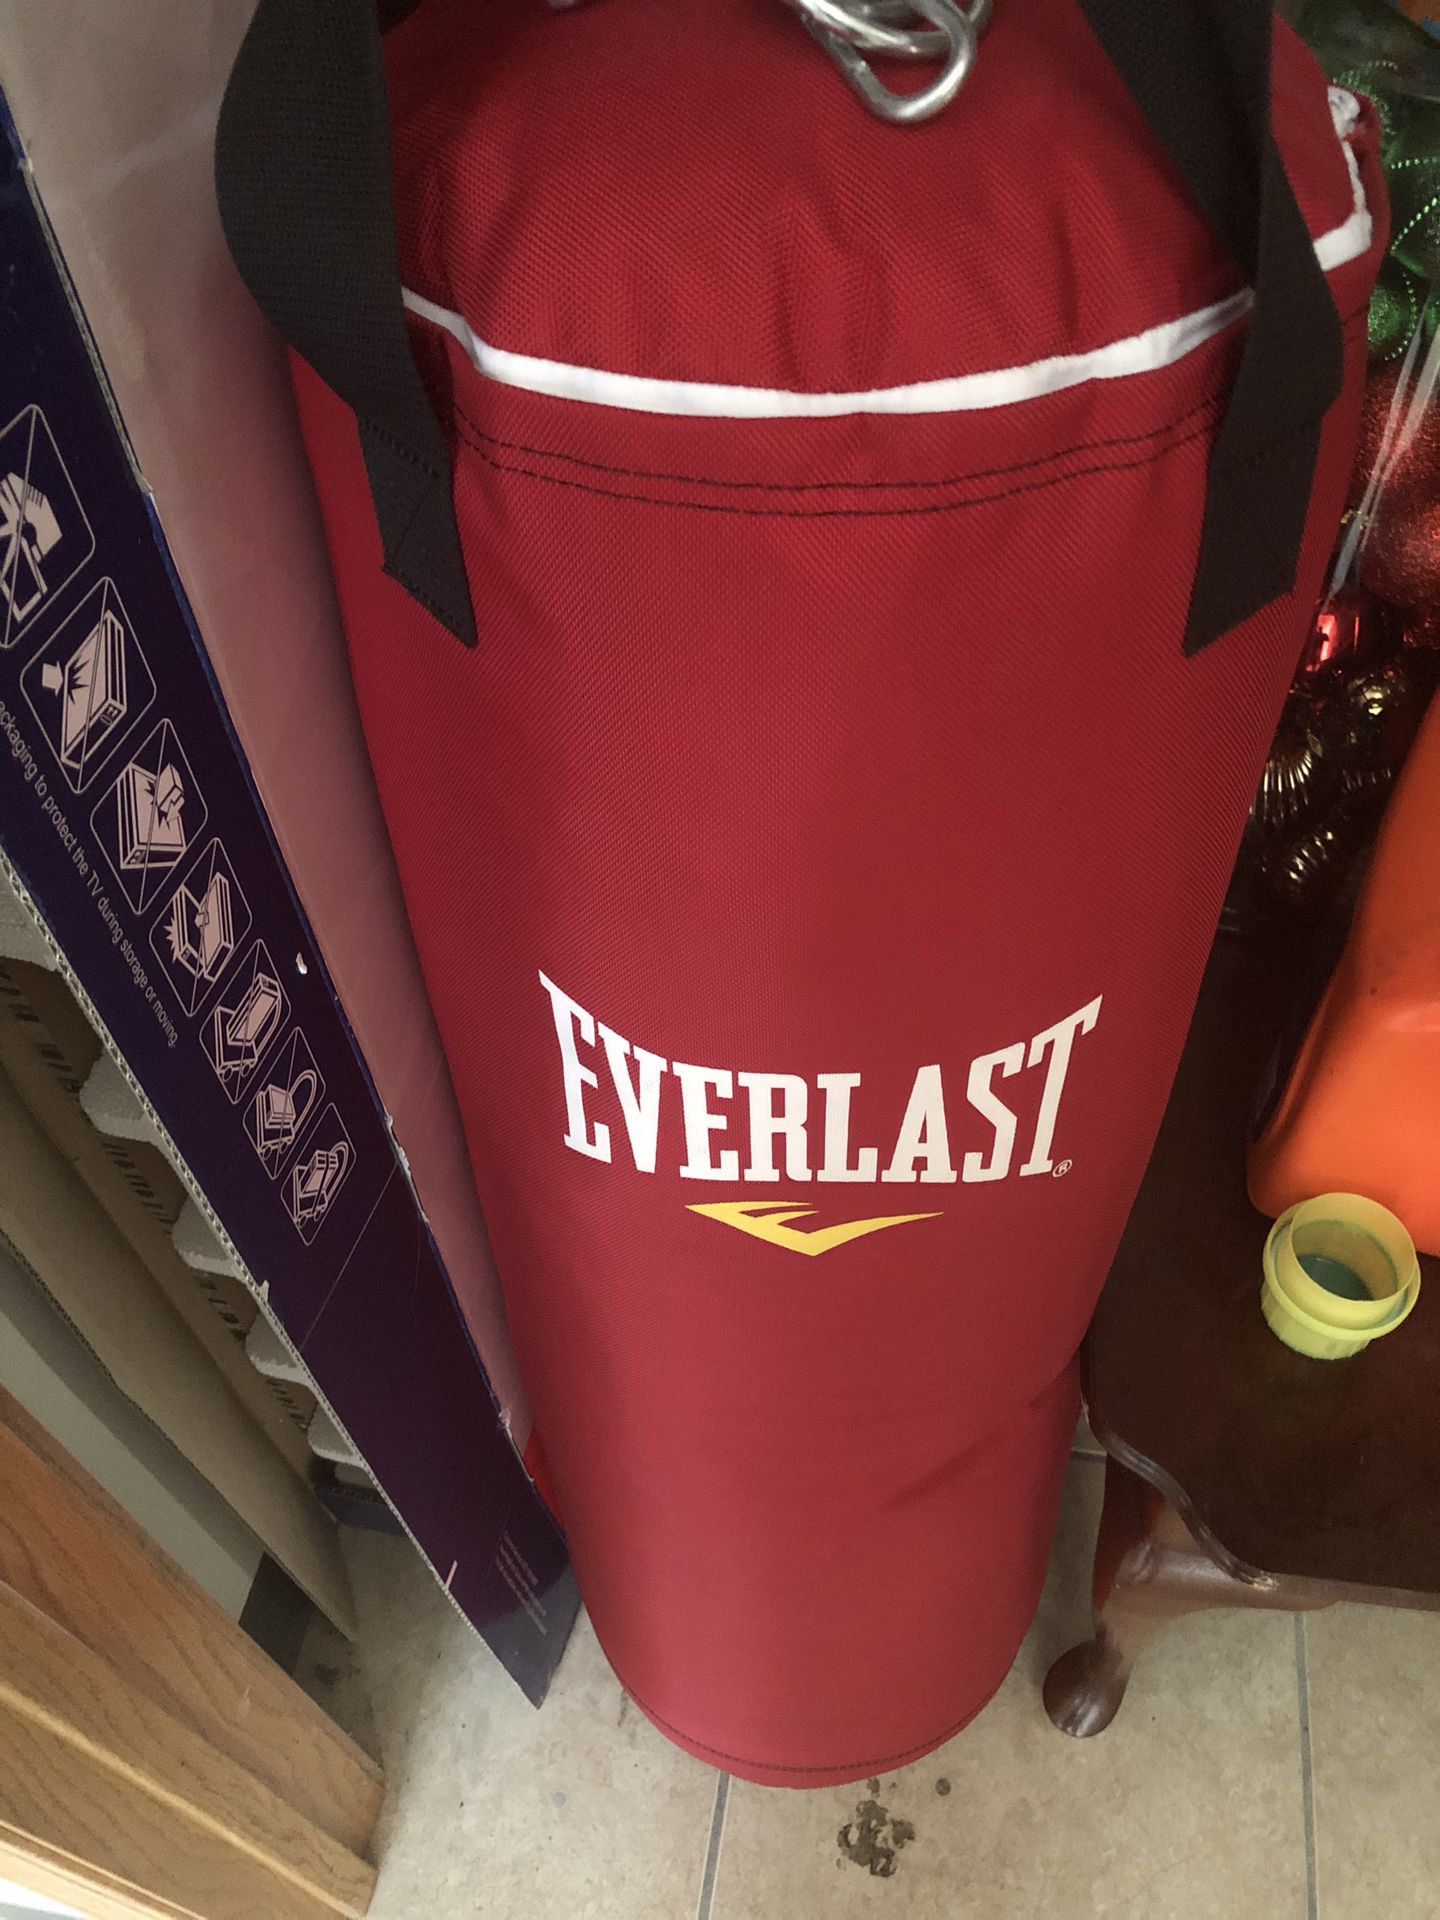 Everlast big bag stand with speed bag